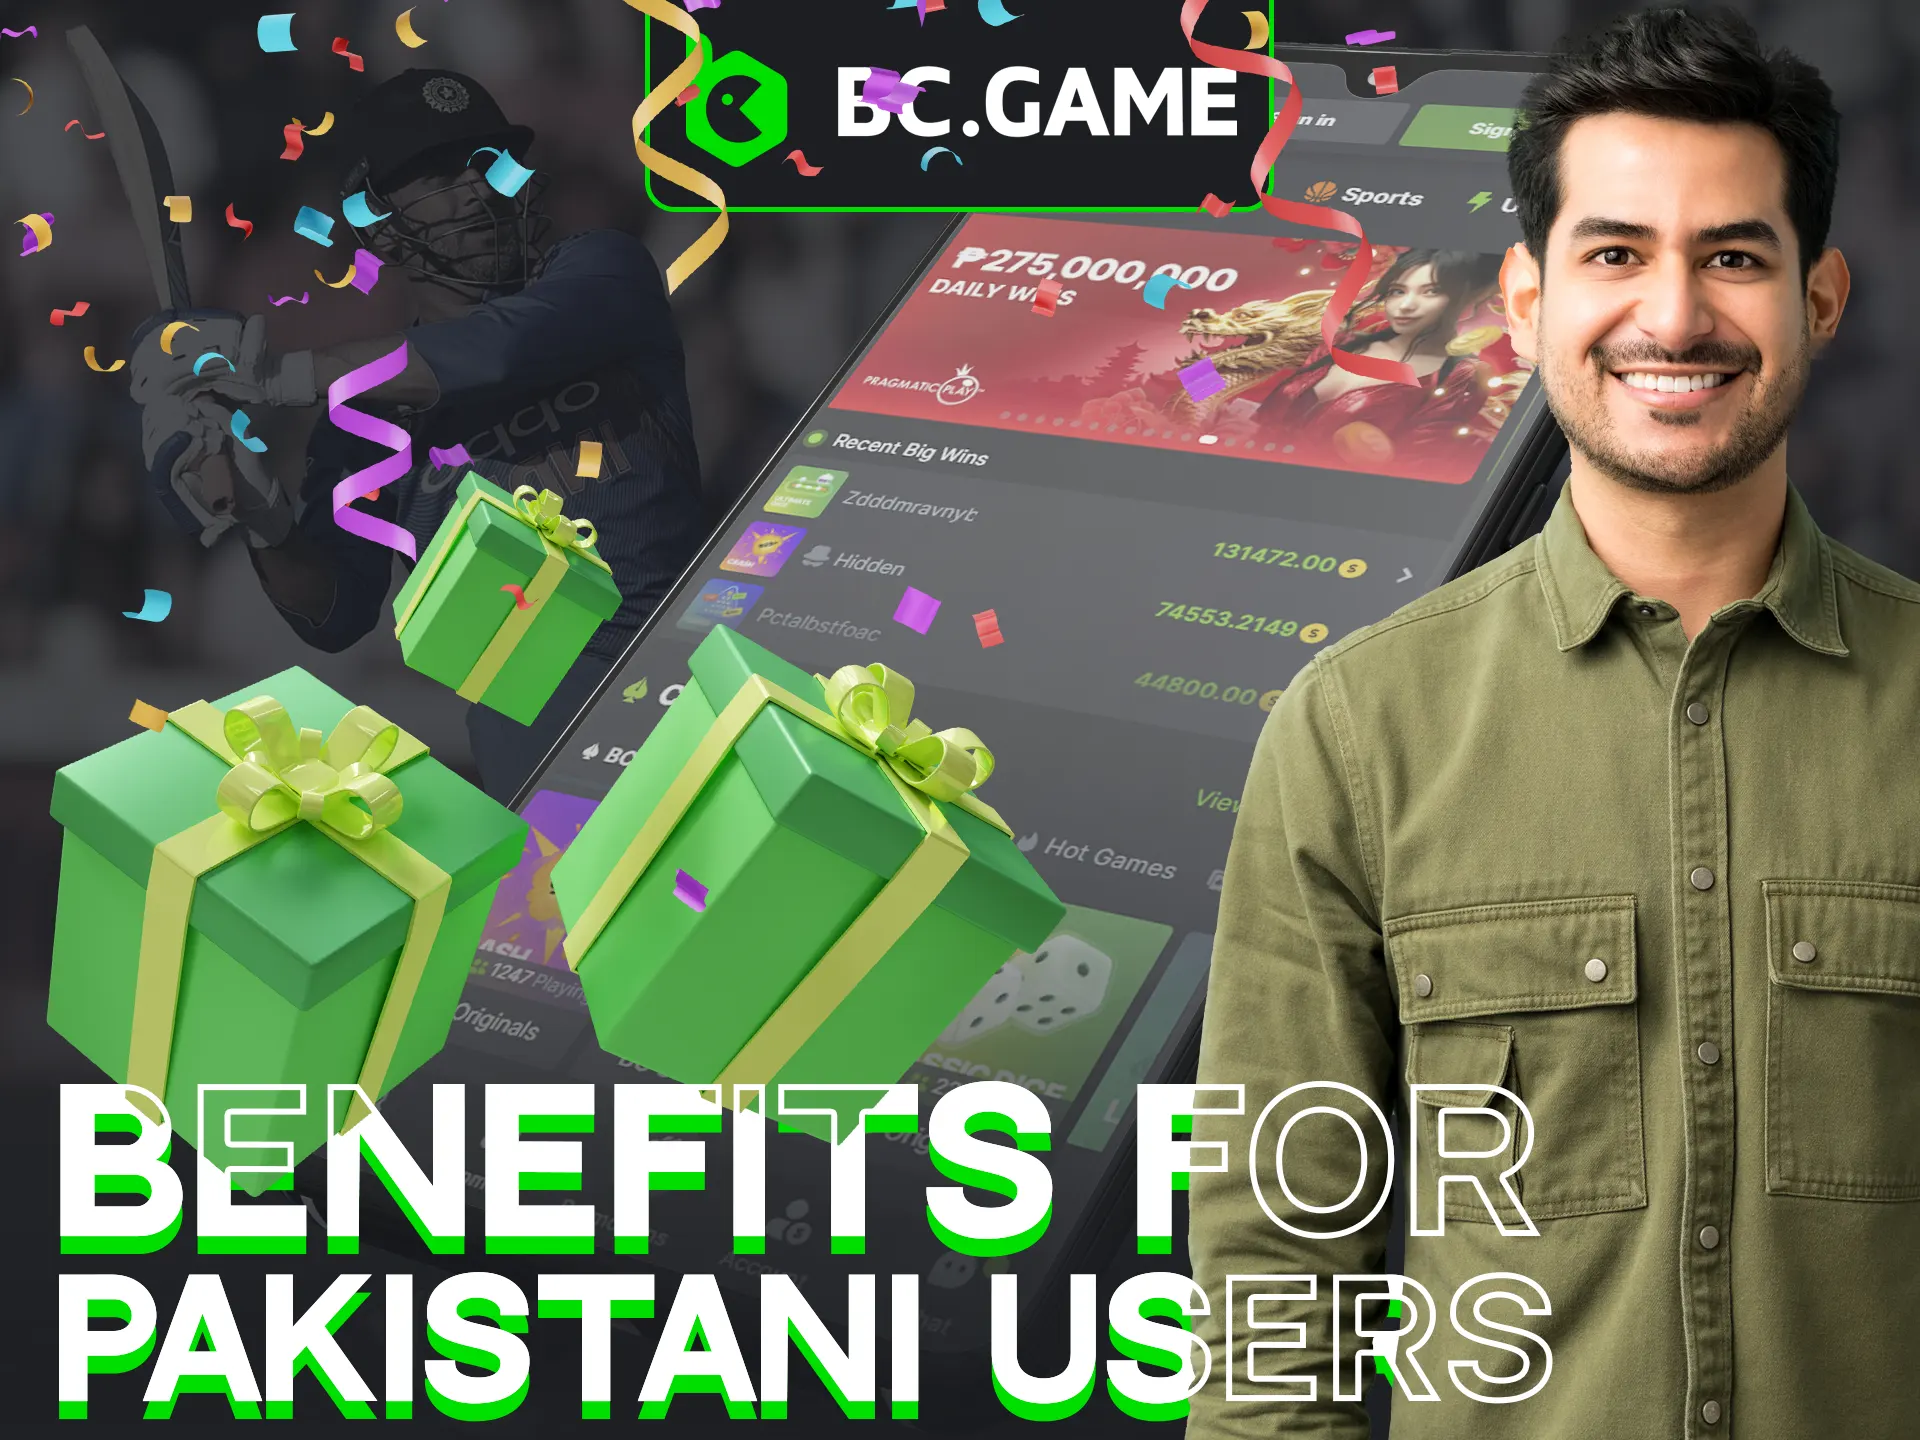 BC Game App offers exclusive benefits for Pakistani users.